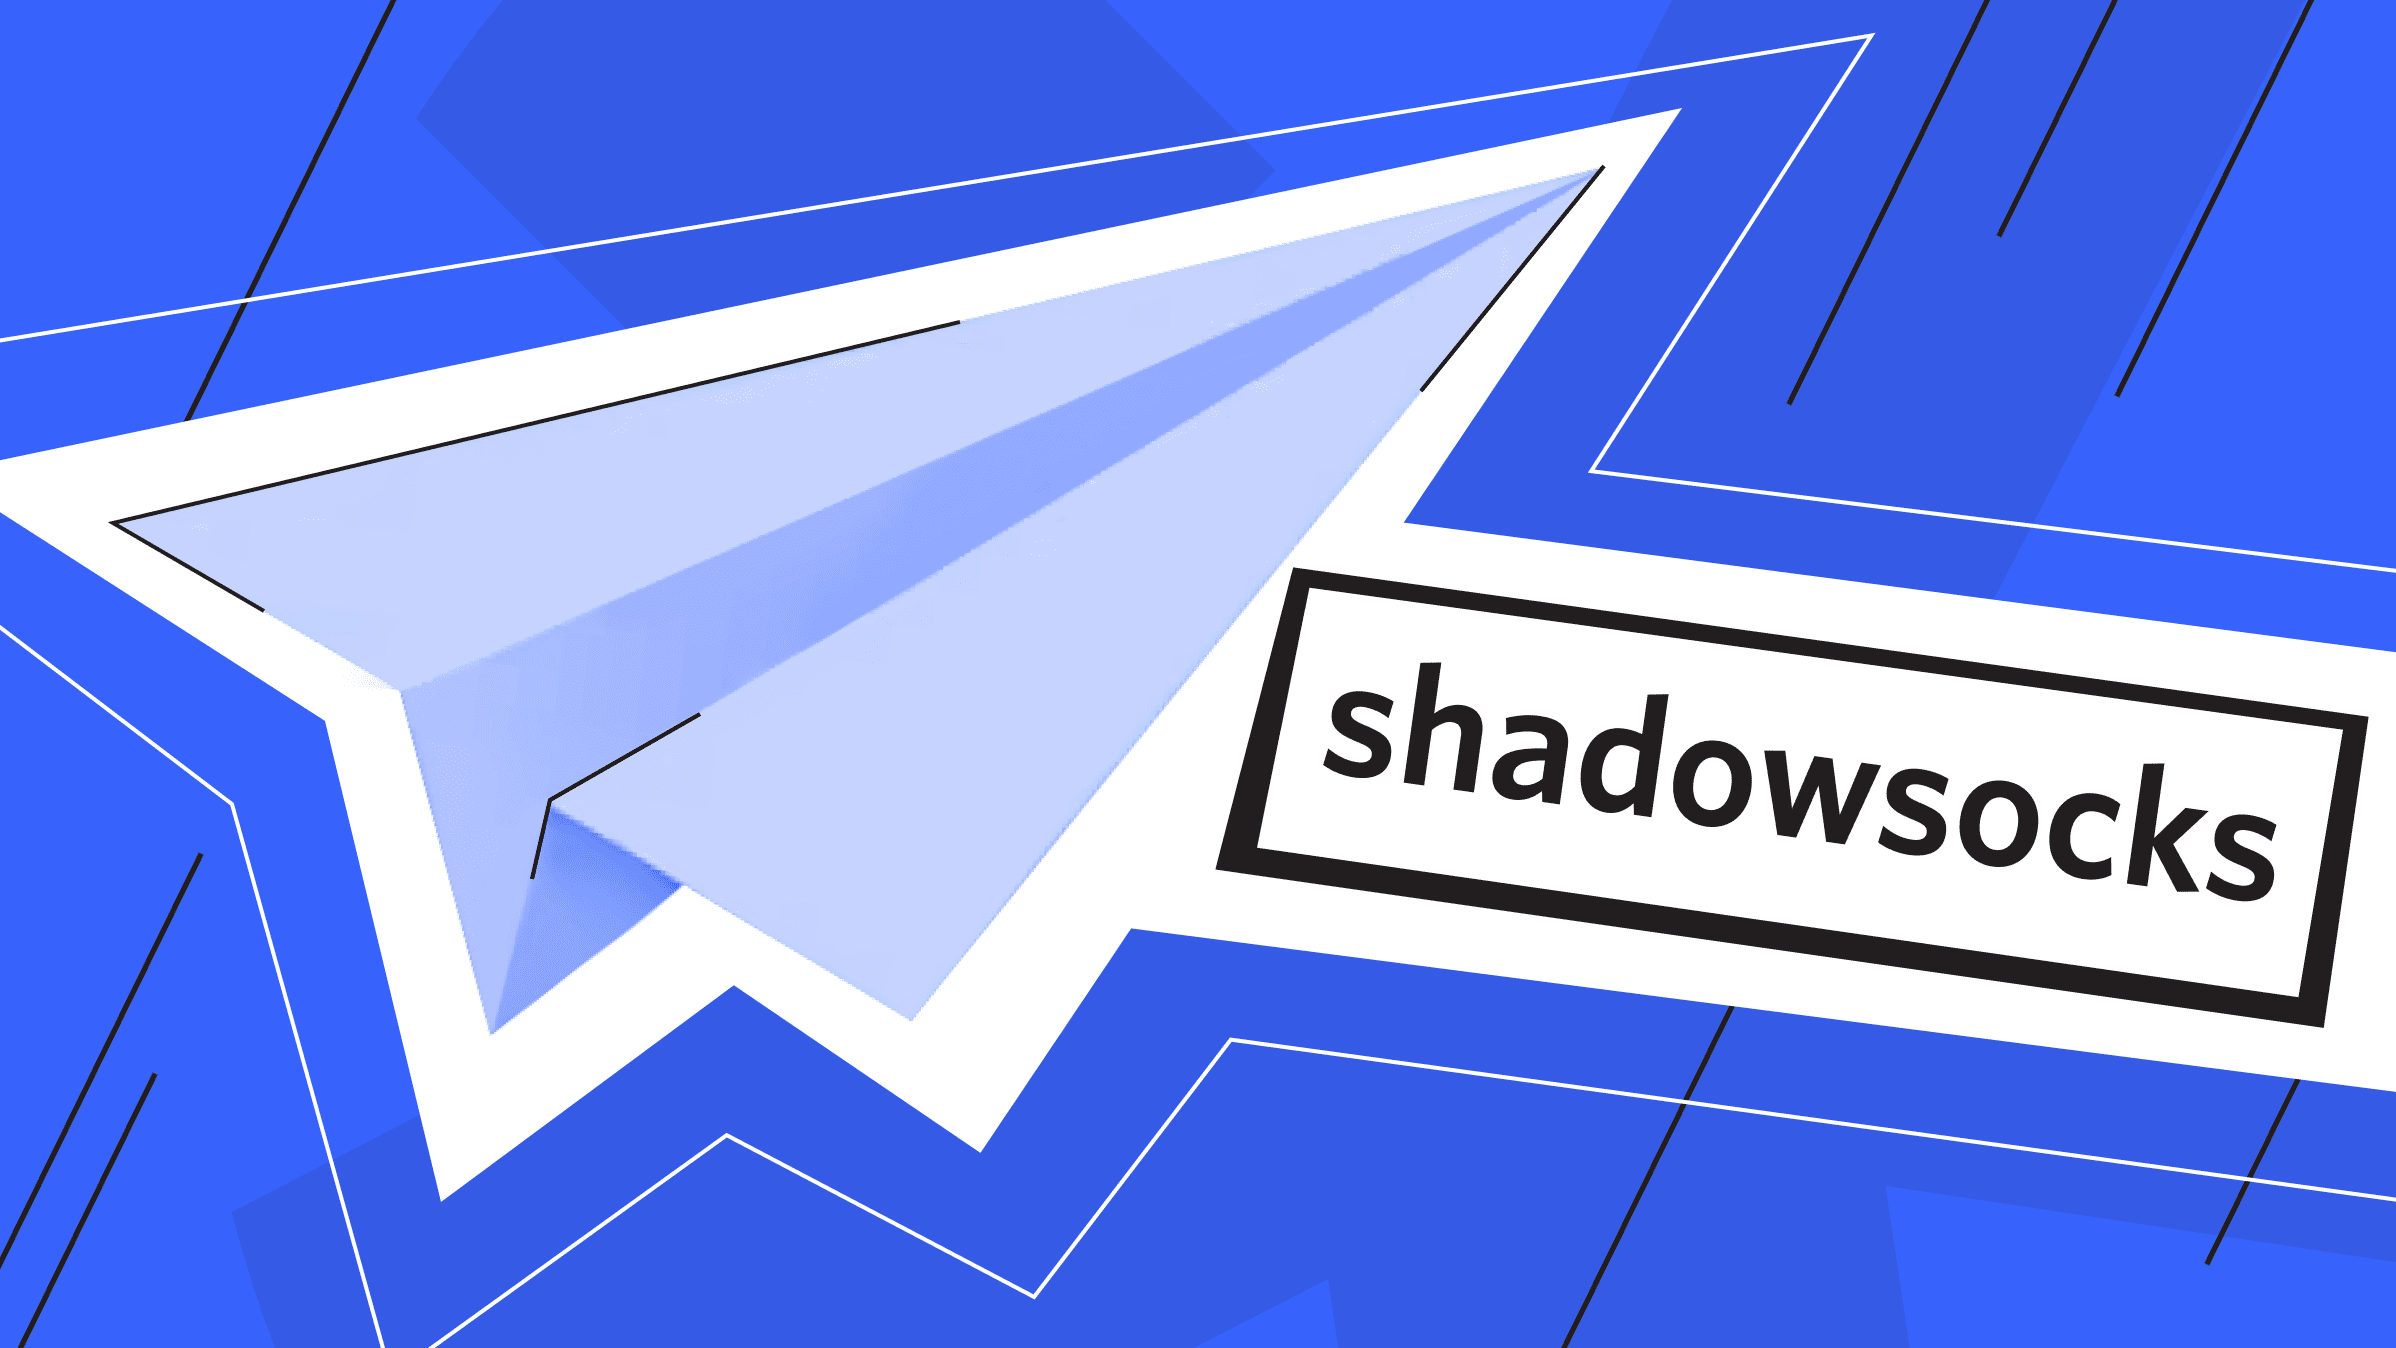 VPN on steroids: what is Shadowsocks and how to use it